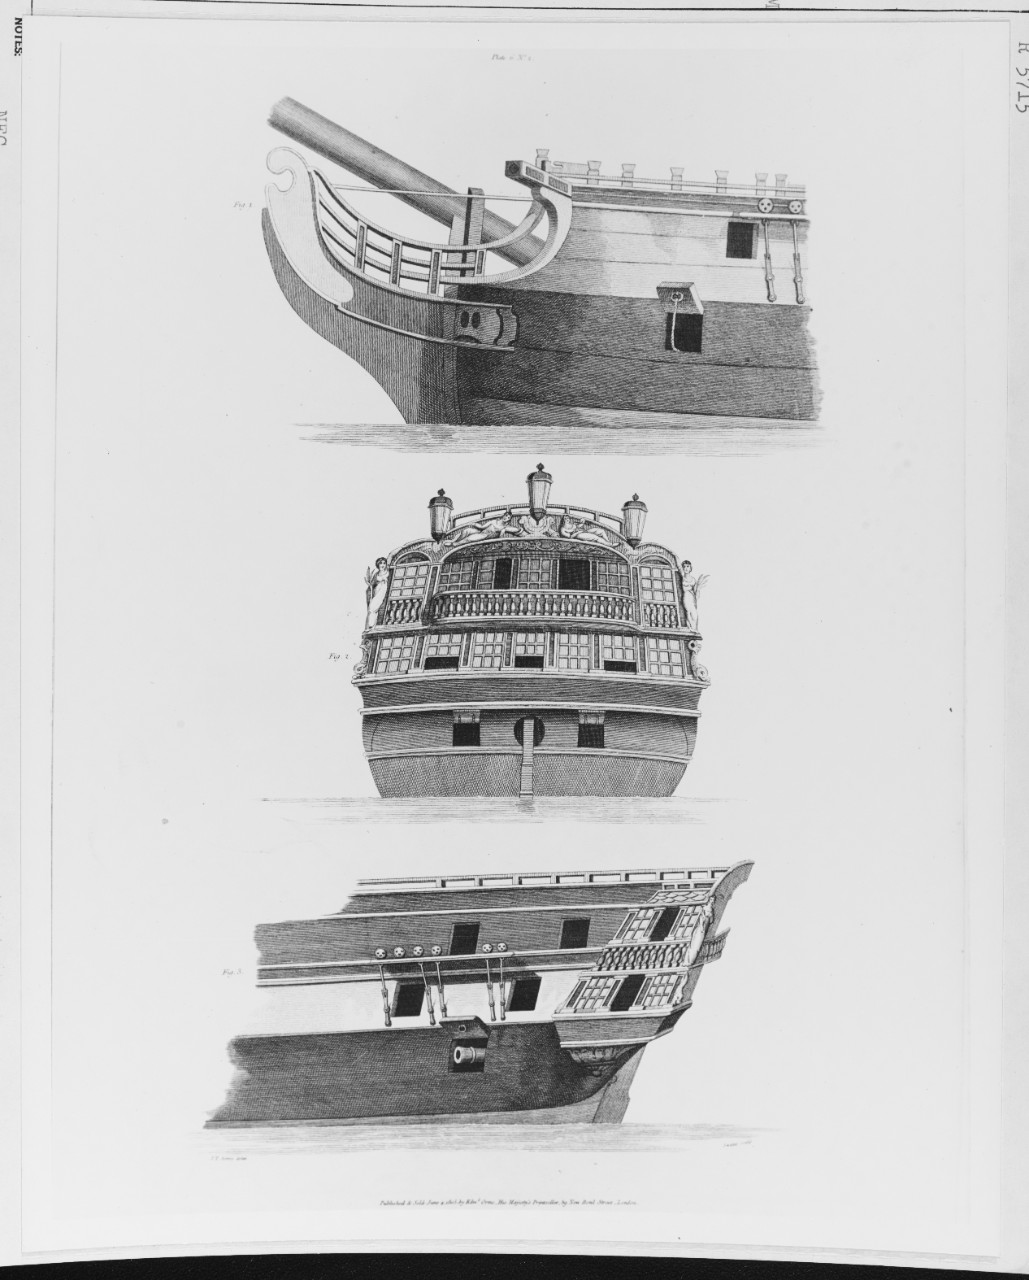 Head, Stern, and quarter of a 74 gun ship, about 1800